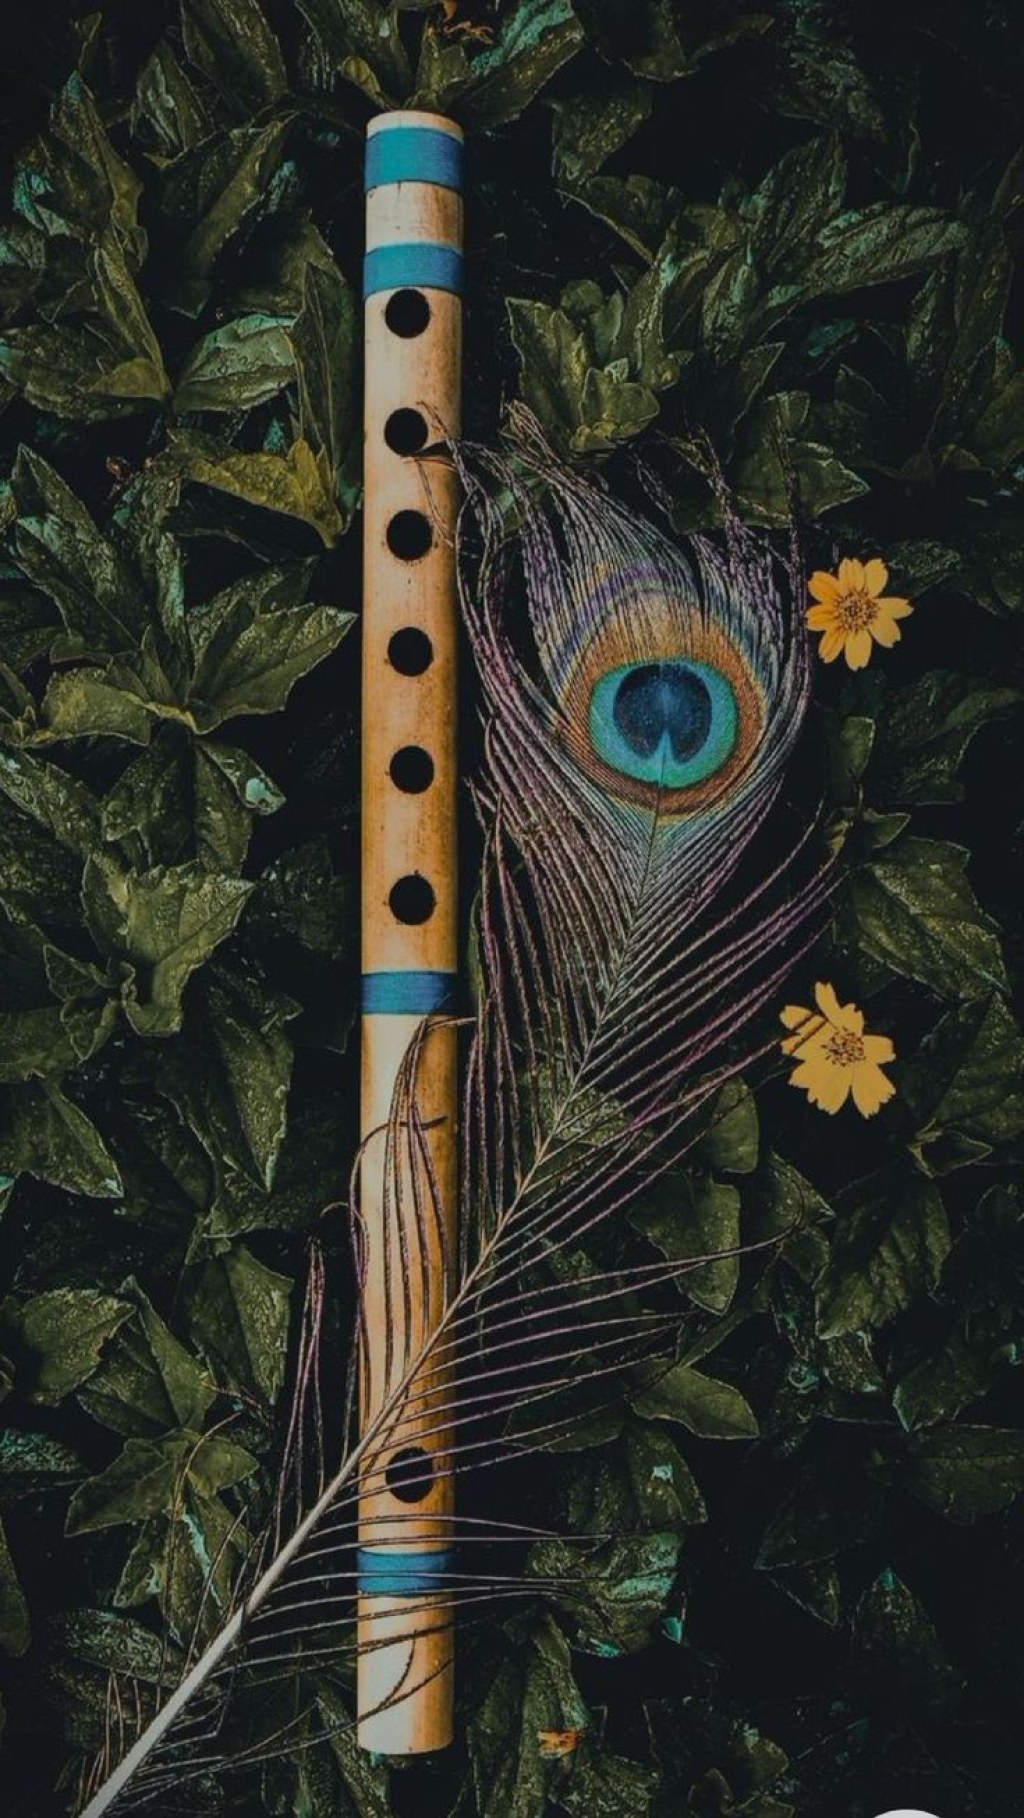 Picture of: Flute and peacock feather 🪶 in   Lord krishna hd wallpaper